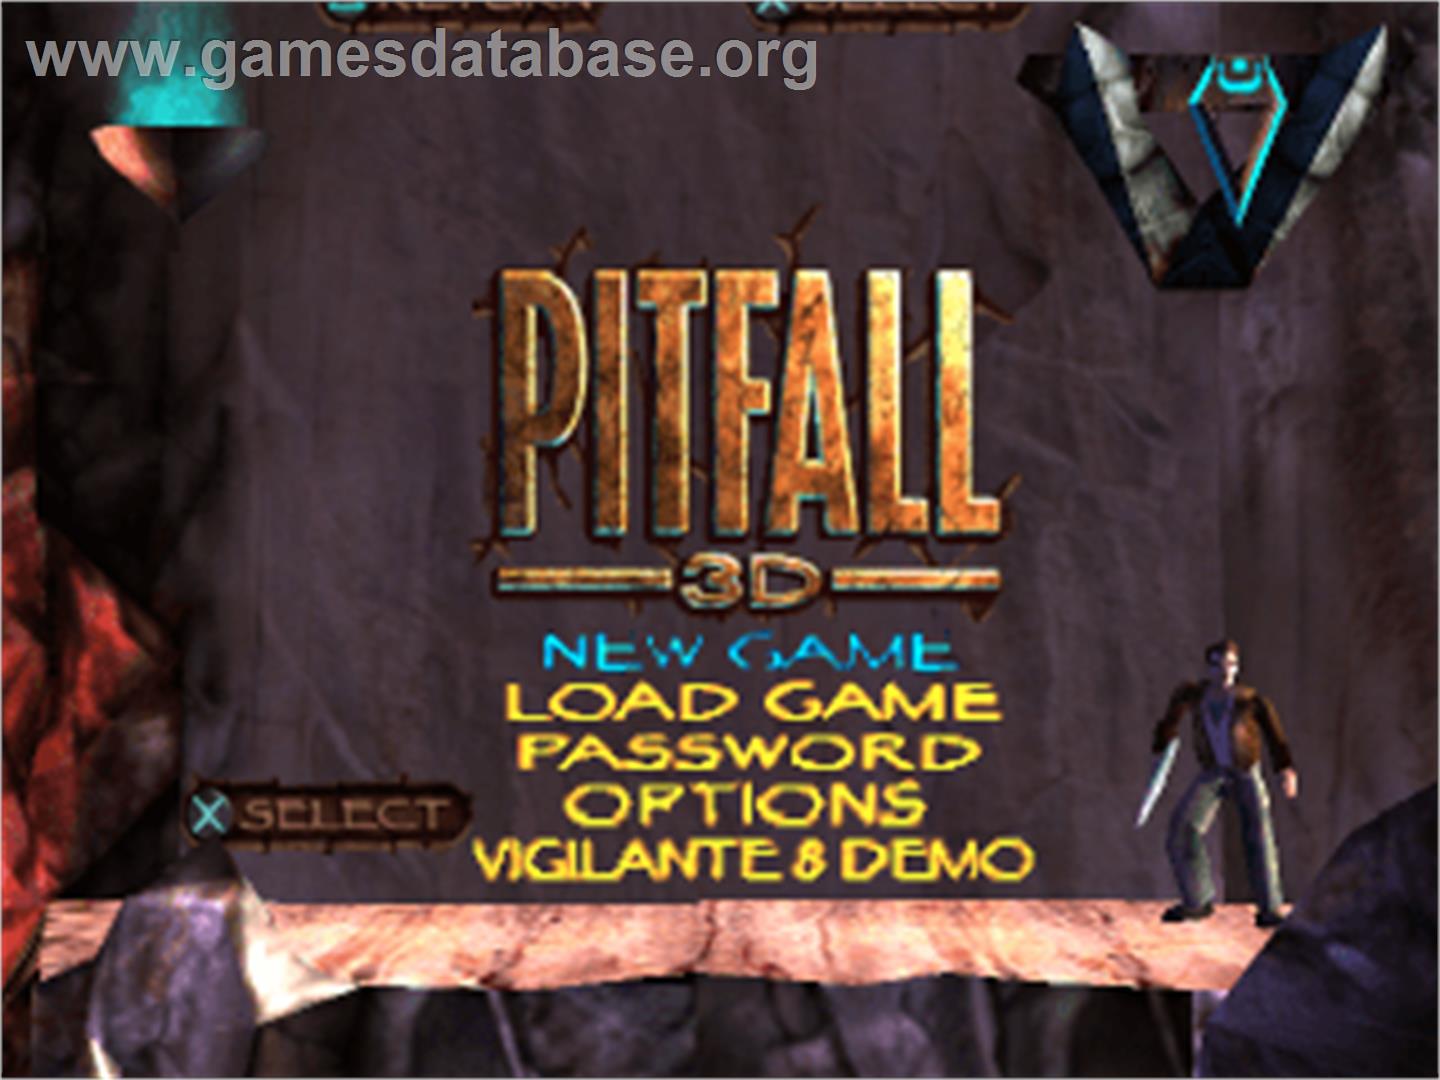 Pitfall 3D: Beyond the Jungle - Sony Playstation - Artwork - Title Screen